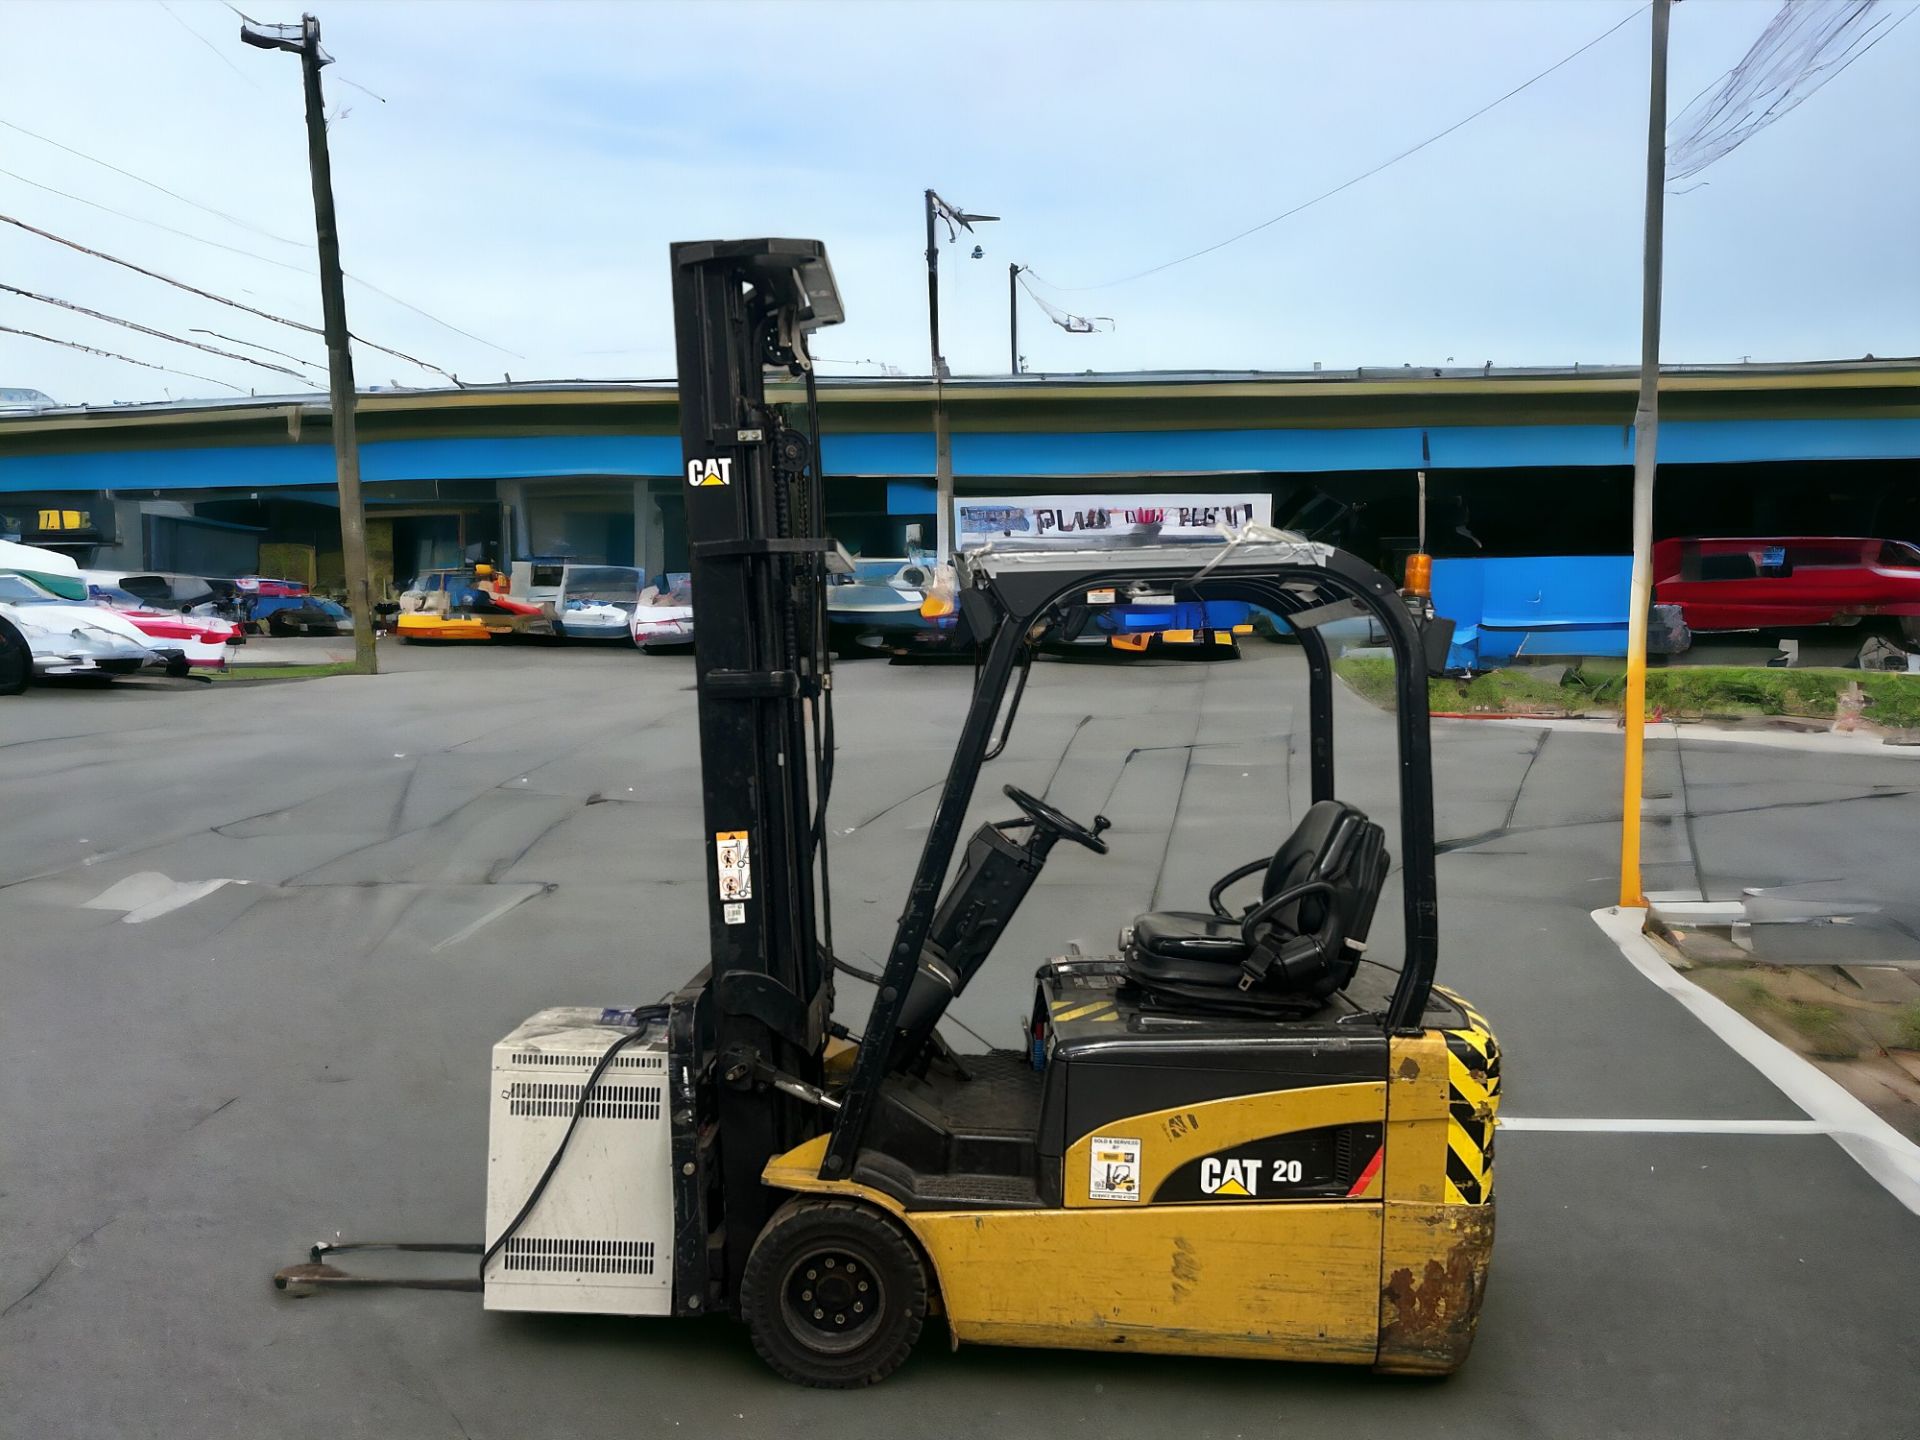 CAT EP20NT-48E ELECTRIC FORKLIFT - EFFICIENT MATERIAL HANDLING SOLUTION **(INCLUDES CHARGER)**